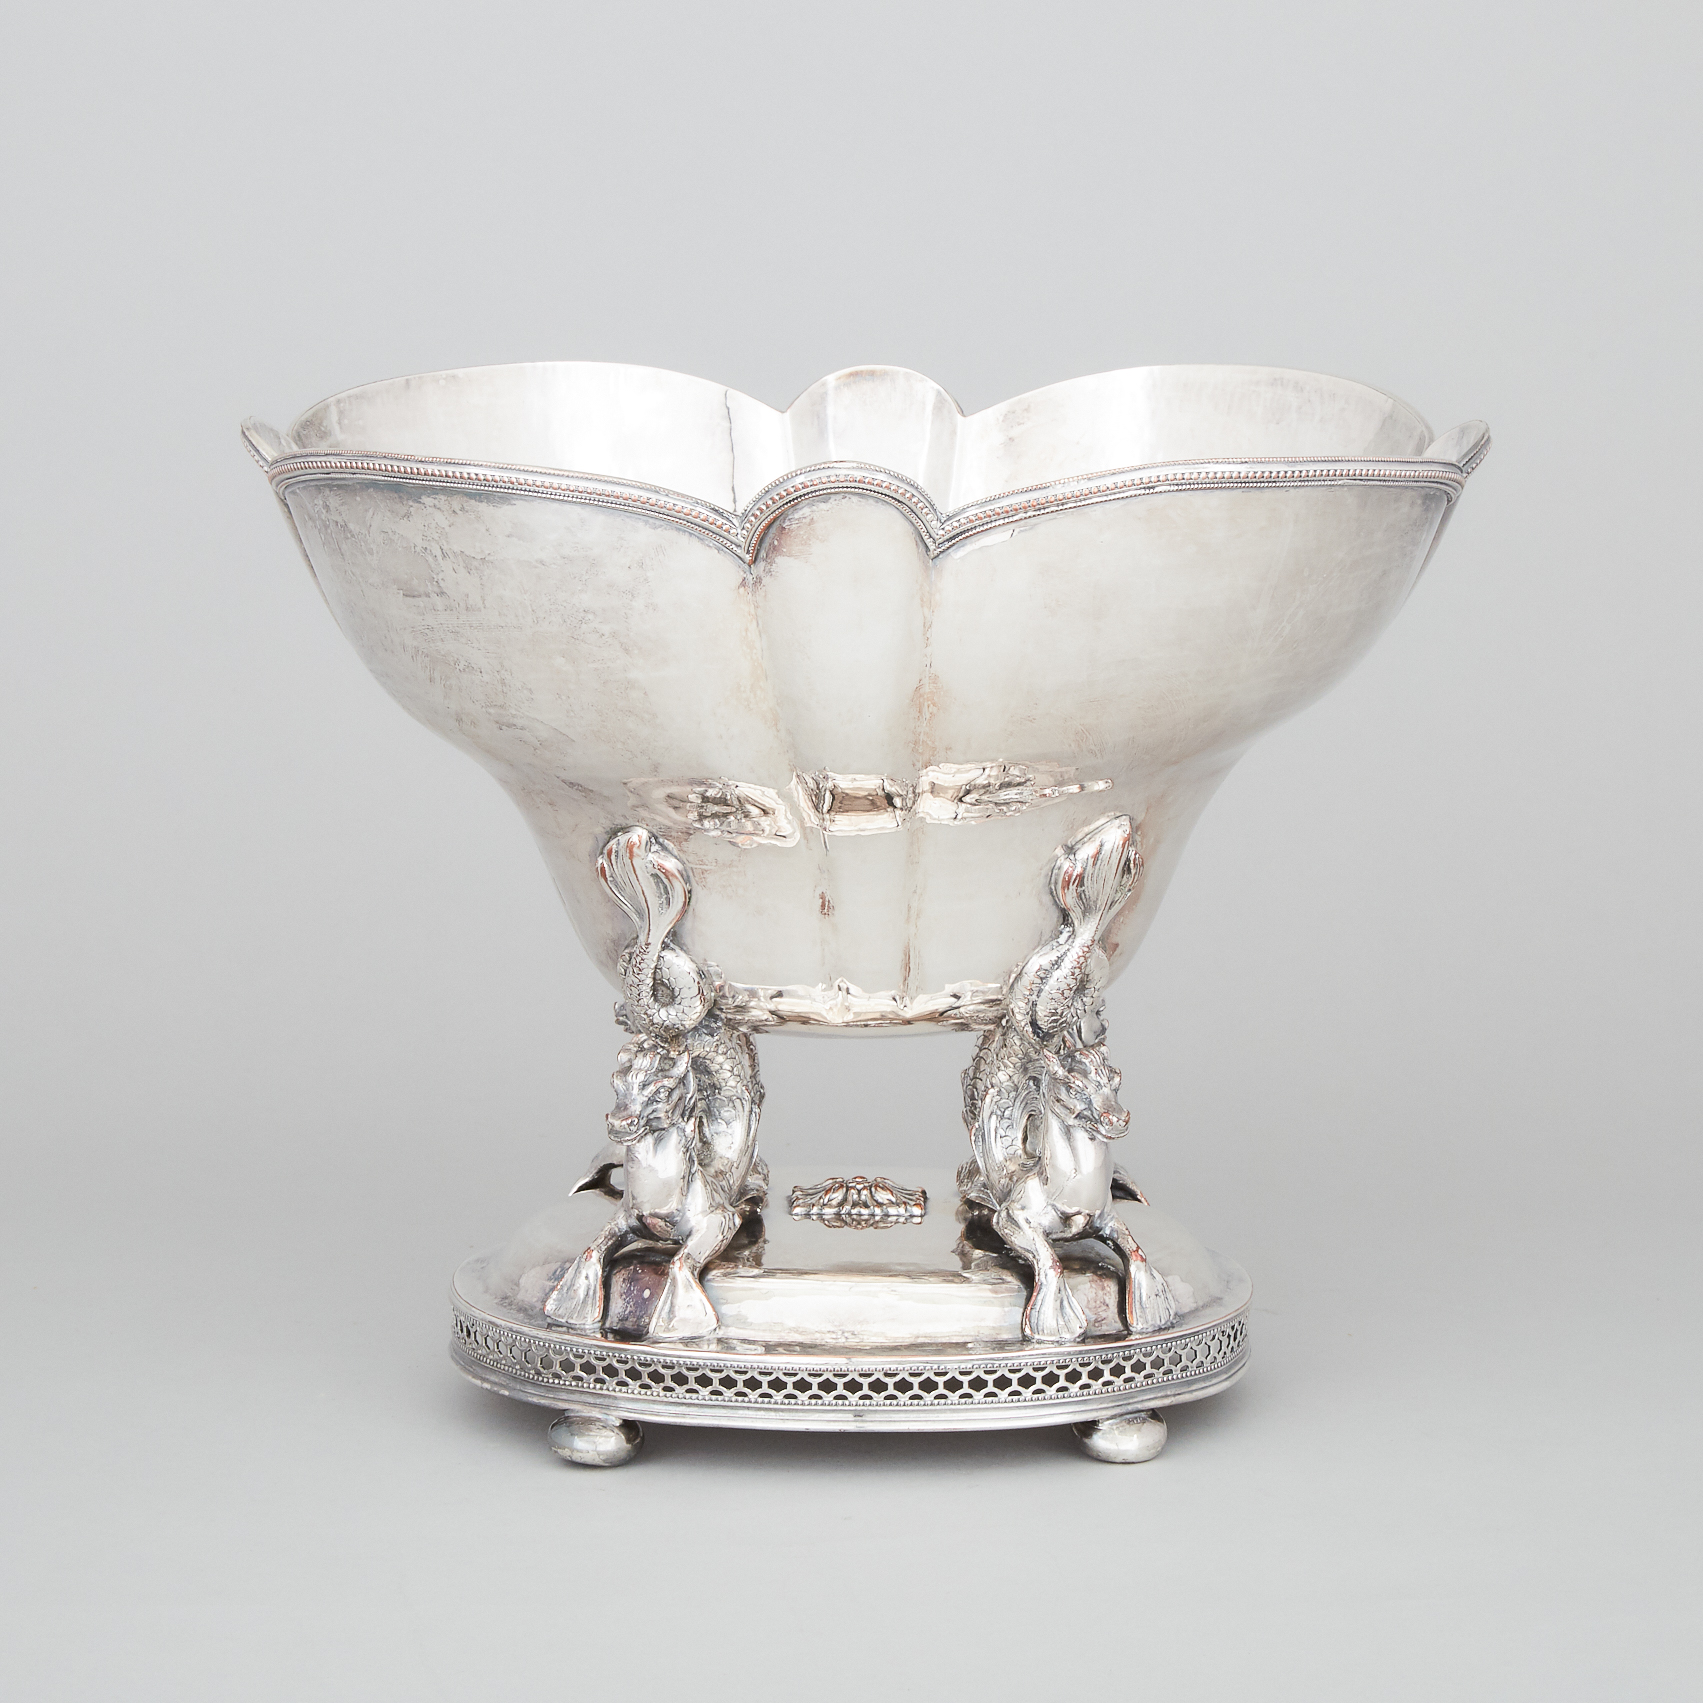 Continental Silver Plated Centrepiece, c.1900